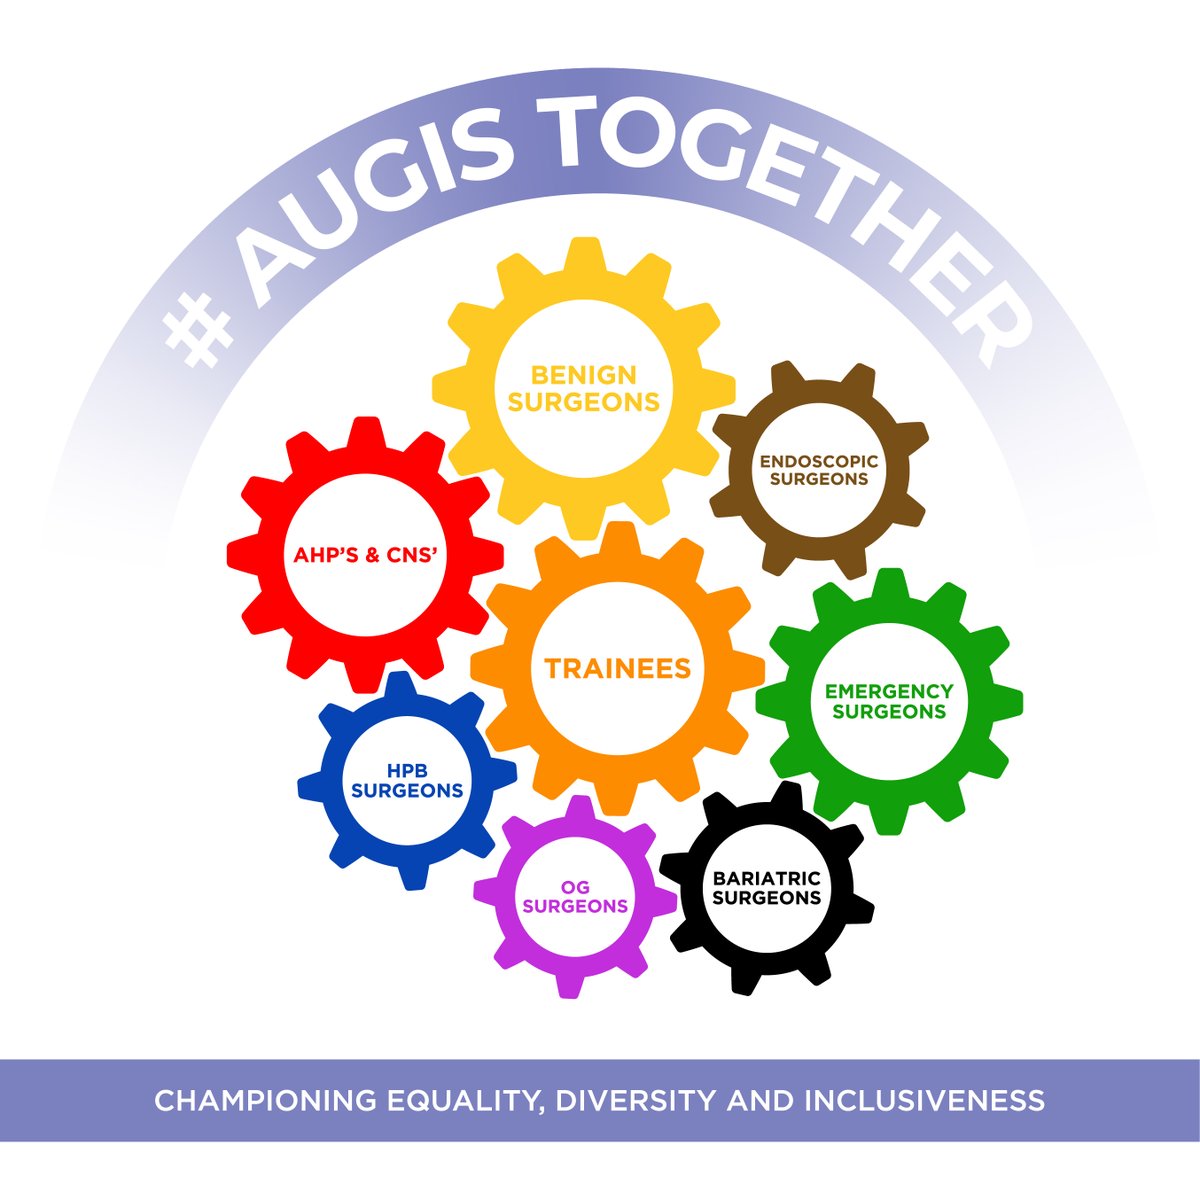 AUGIS 2023 - Submit your abstract before 9am on the 6th July. Submit at: augis.org/Events-Webinar…